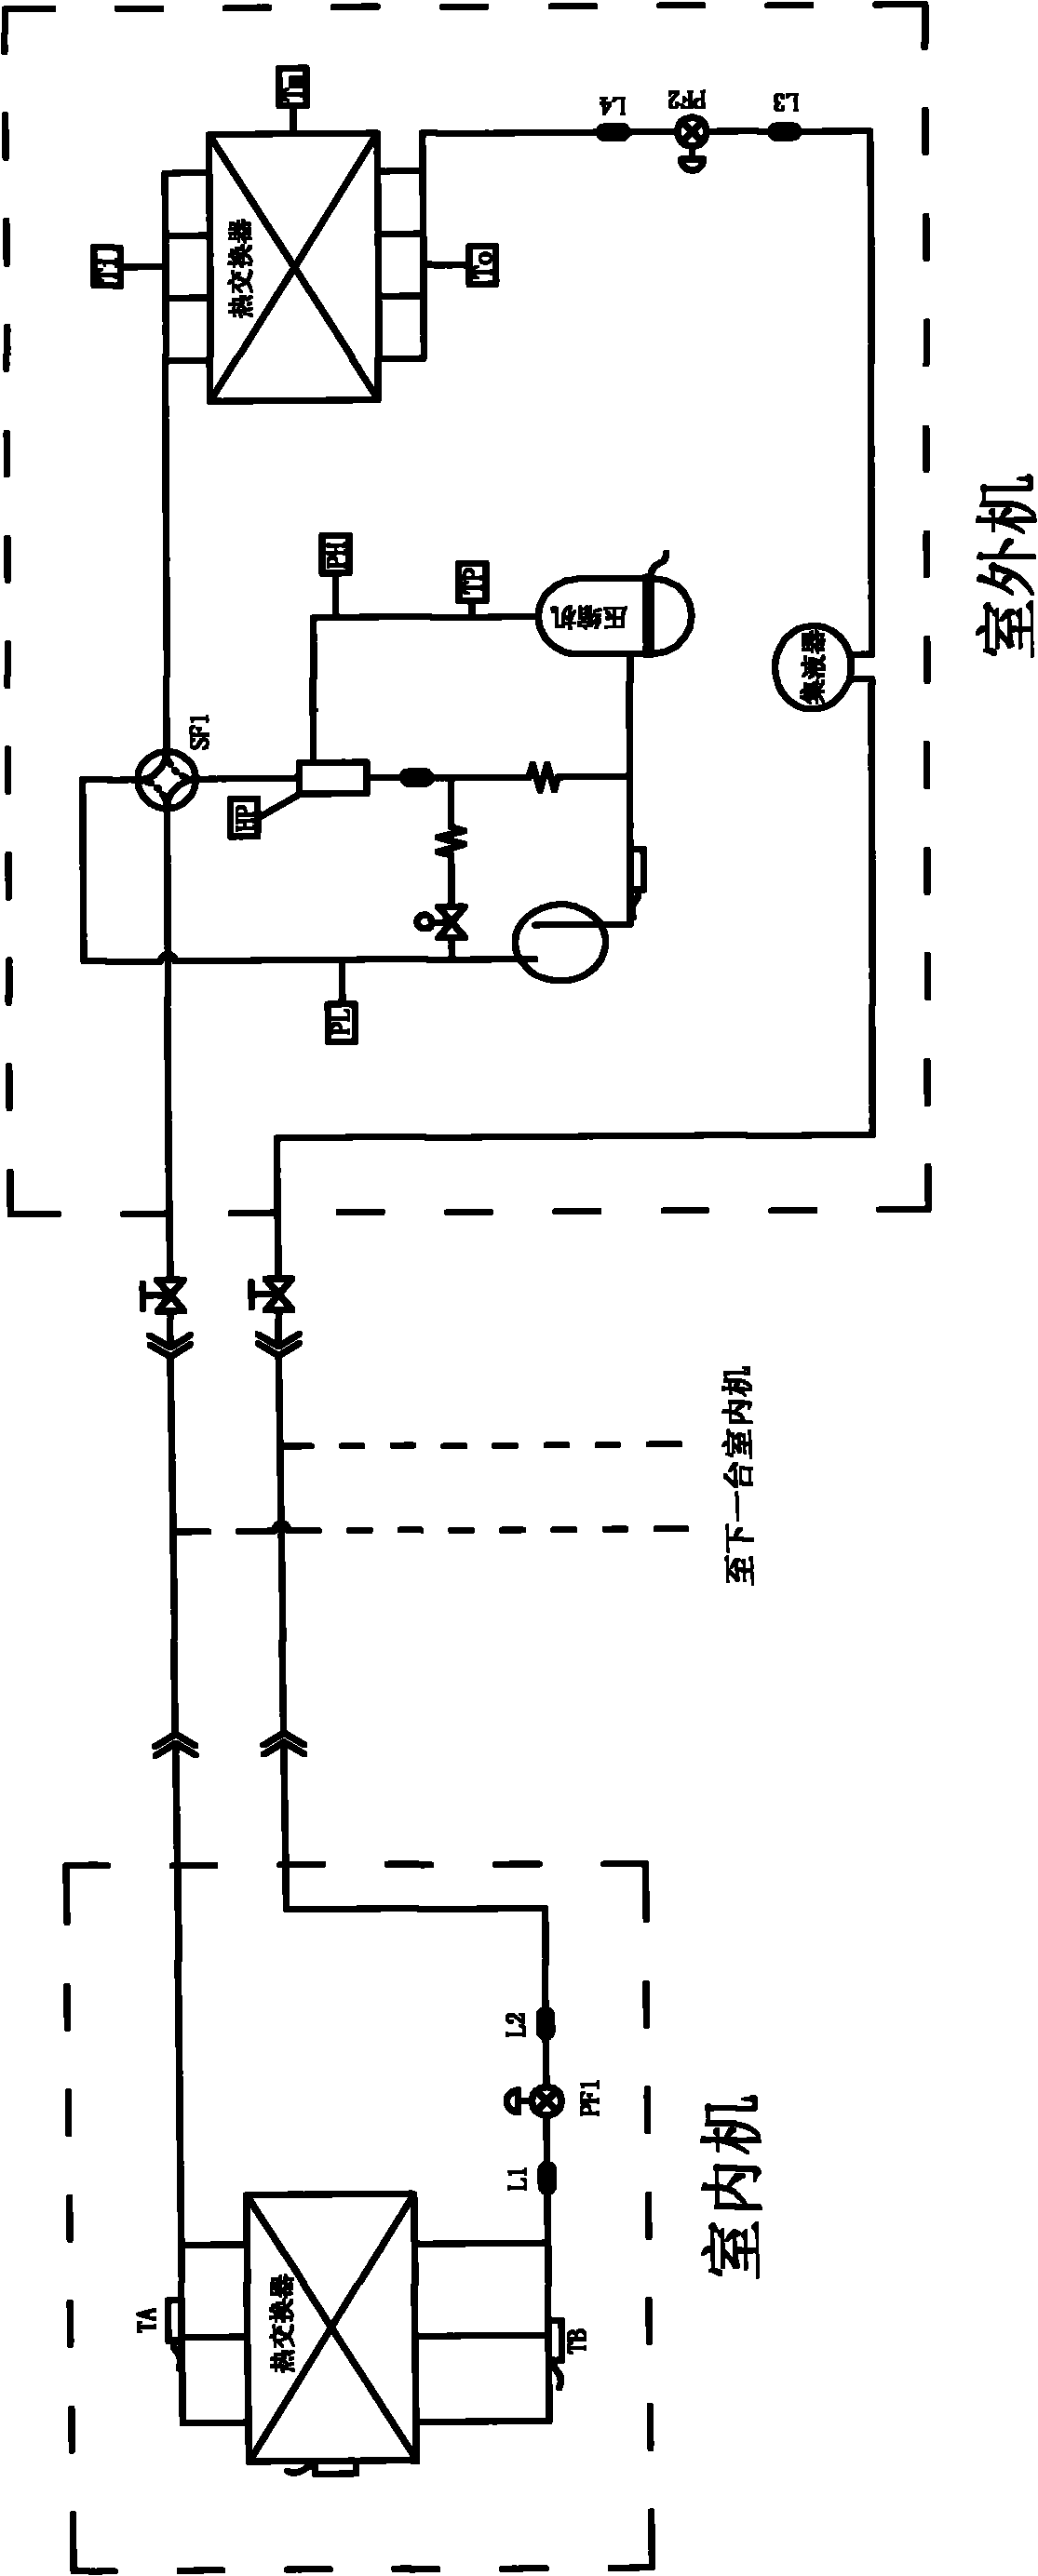 Defrosting control method for air-conditioning system